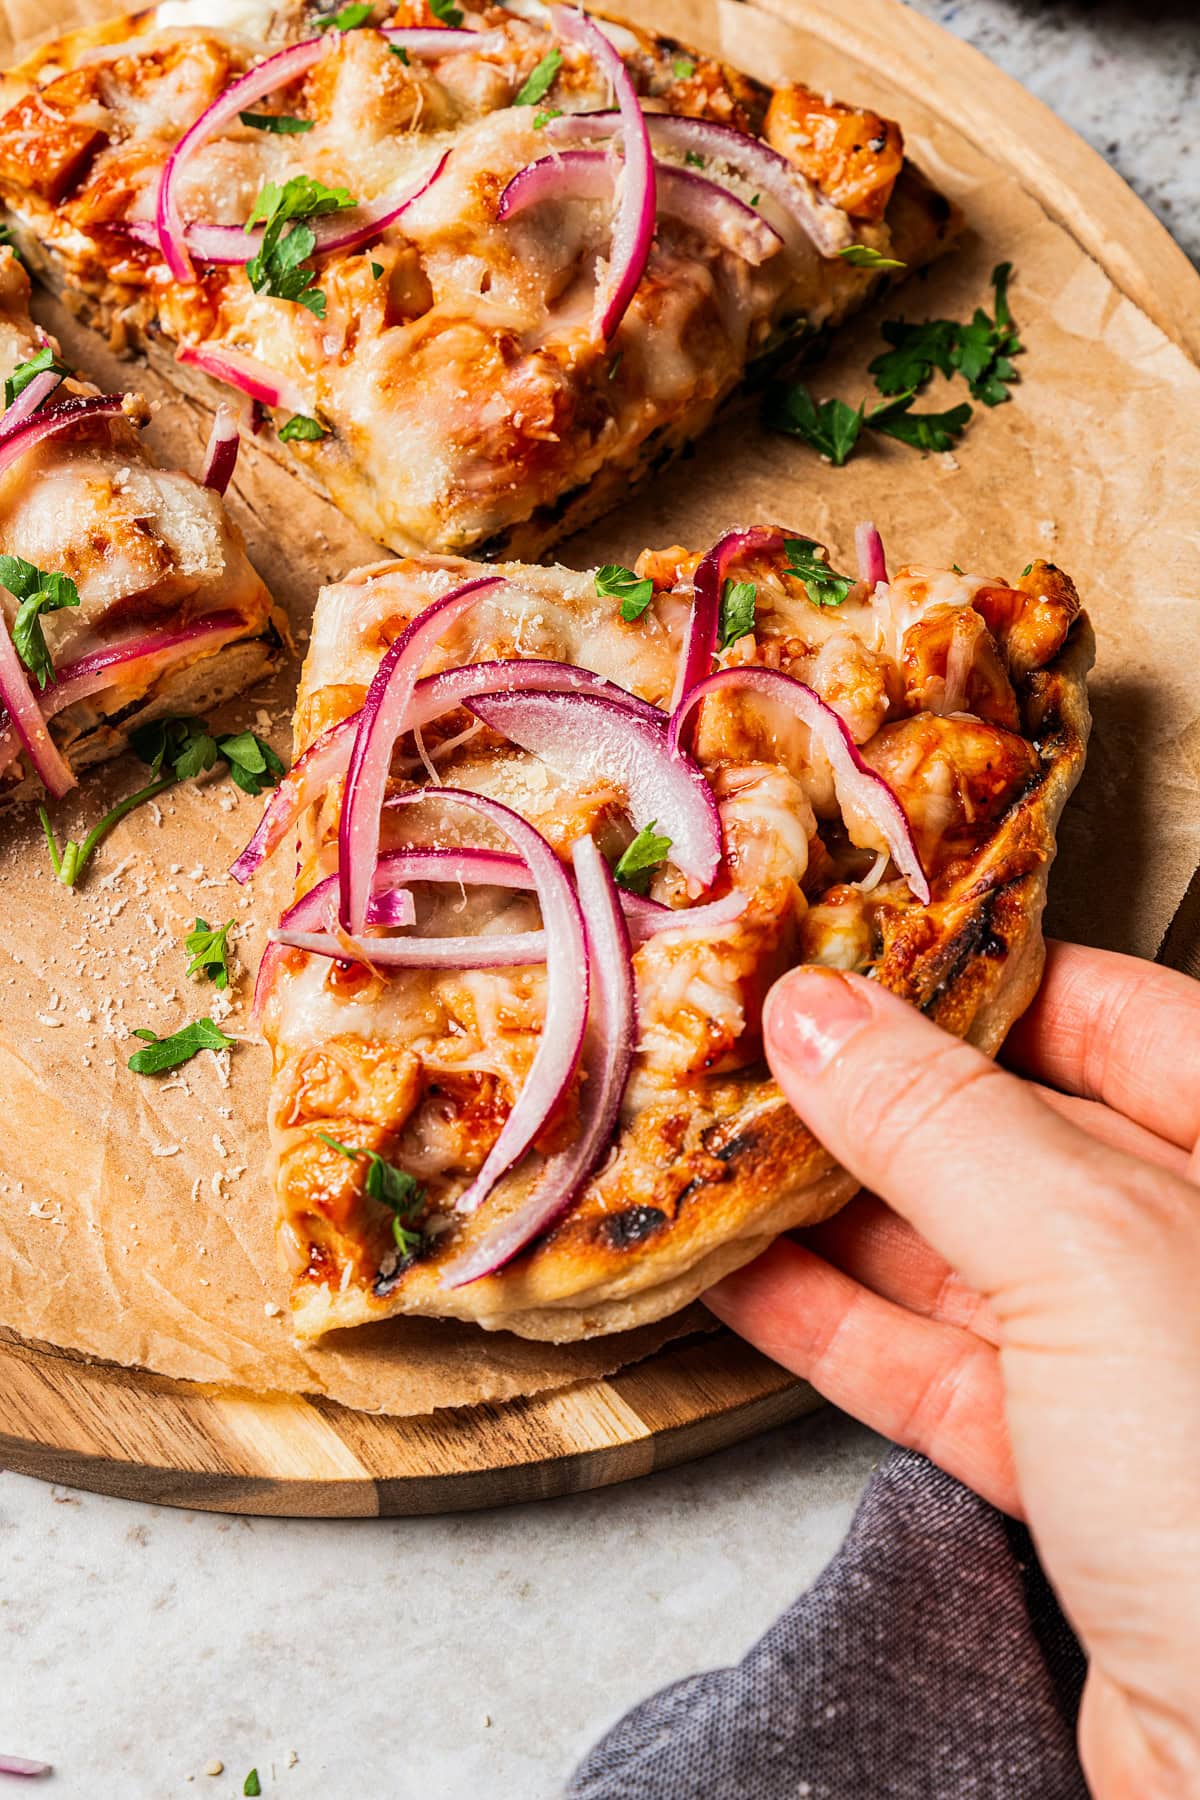 A hand picking up a pizza slice topped with barbecue chicken and sliced red onions.